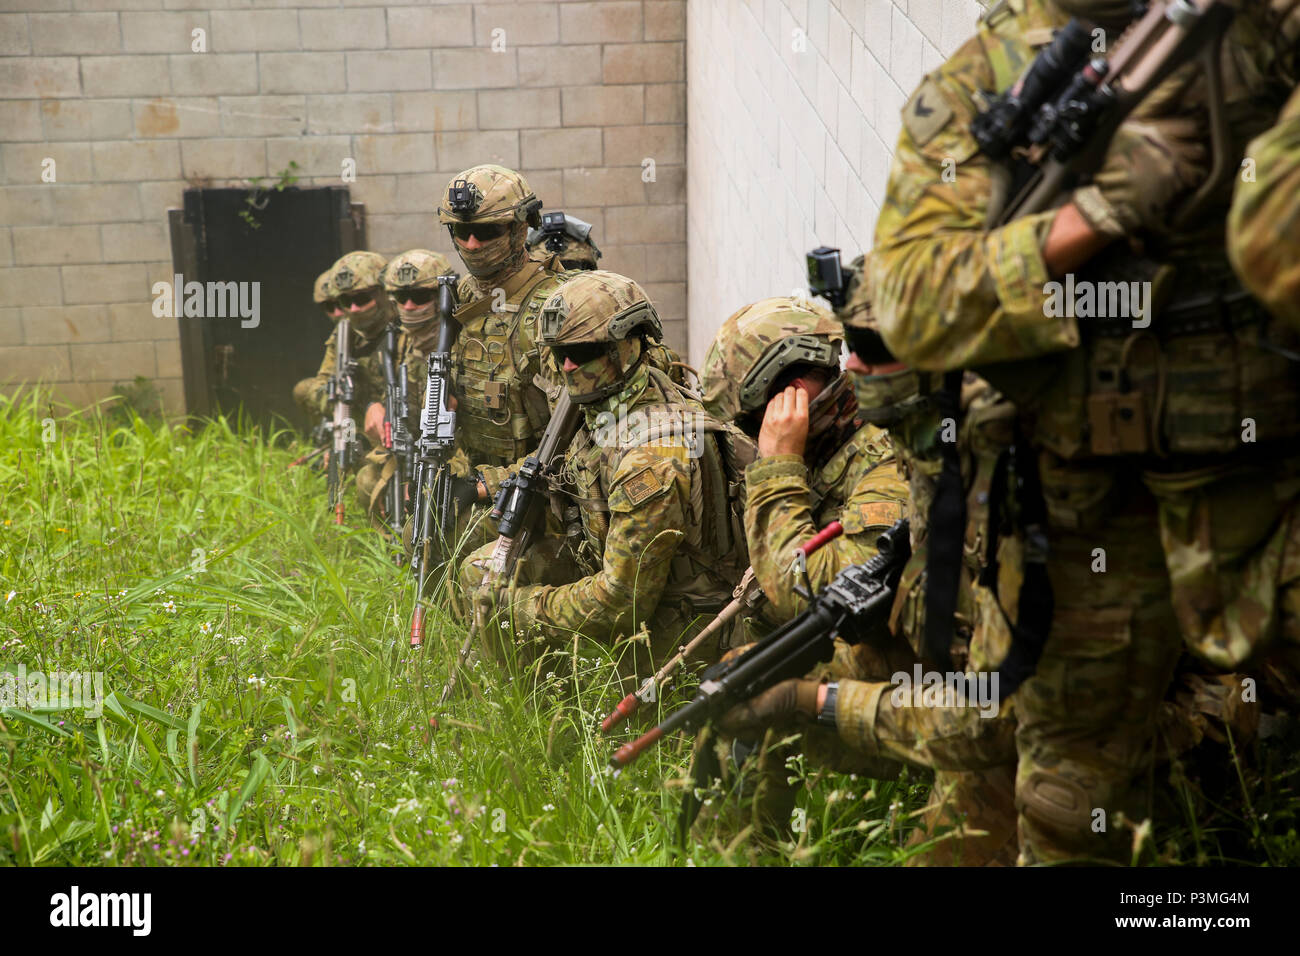 160714-M-JM737-055 KAHUKU TRAINING AREA, Hawaii (July 13, 2016) - Members of the Australian Army, attached to Golf Company, 2nd Battalion, 3rd Marines, wait for the signal to begin securing a building as part of a raid during Rim of the Pacific 2016. Twenty-six nations, 49 ships, six submarines, about 200 aircraft, and 25,000 personnel are participating in RIMPAC 16 from June 29 to Aug. 4 in and around the Hawaiian Islands and Southern California. The world’s largest international maritime exercise, RIMPAC provides a unique training opportunity while fostering and sustaining cooperative relati Stock Photo